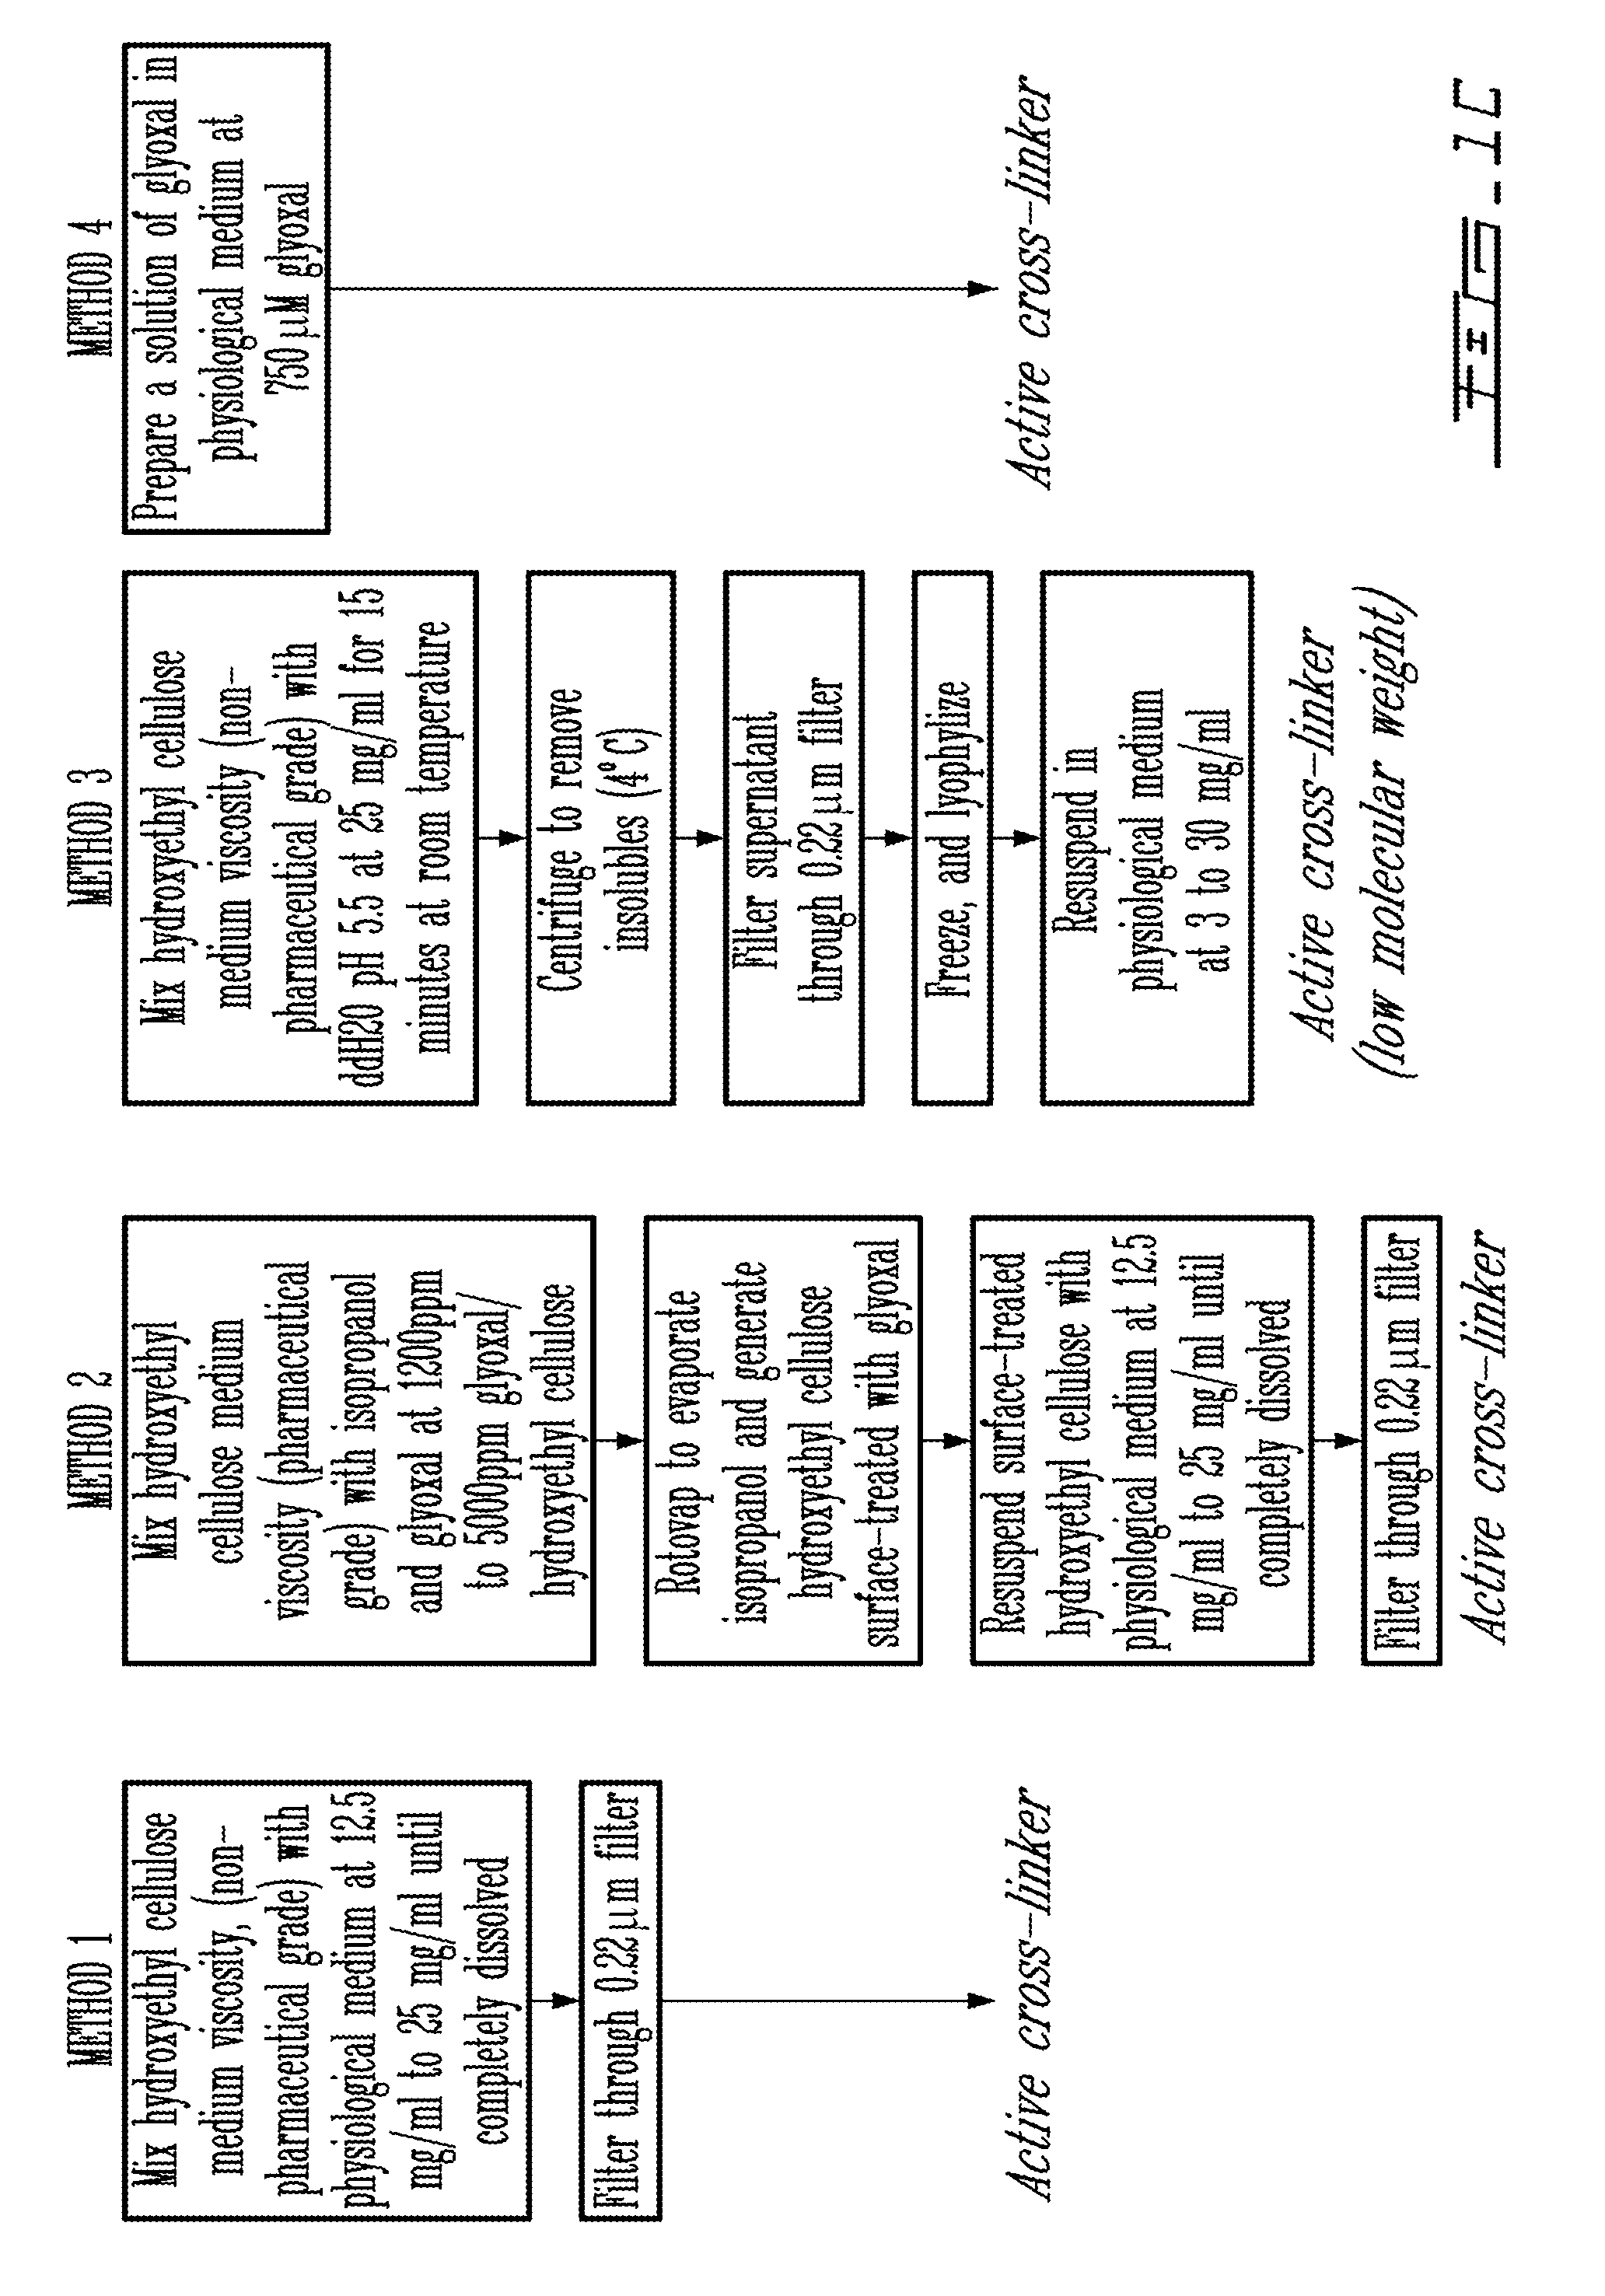 Composition for cytocompatible, injectable, self-gelling polysaccharide solutions for encapsulating and delivering live cells or biologically active factors